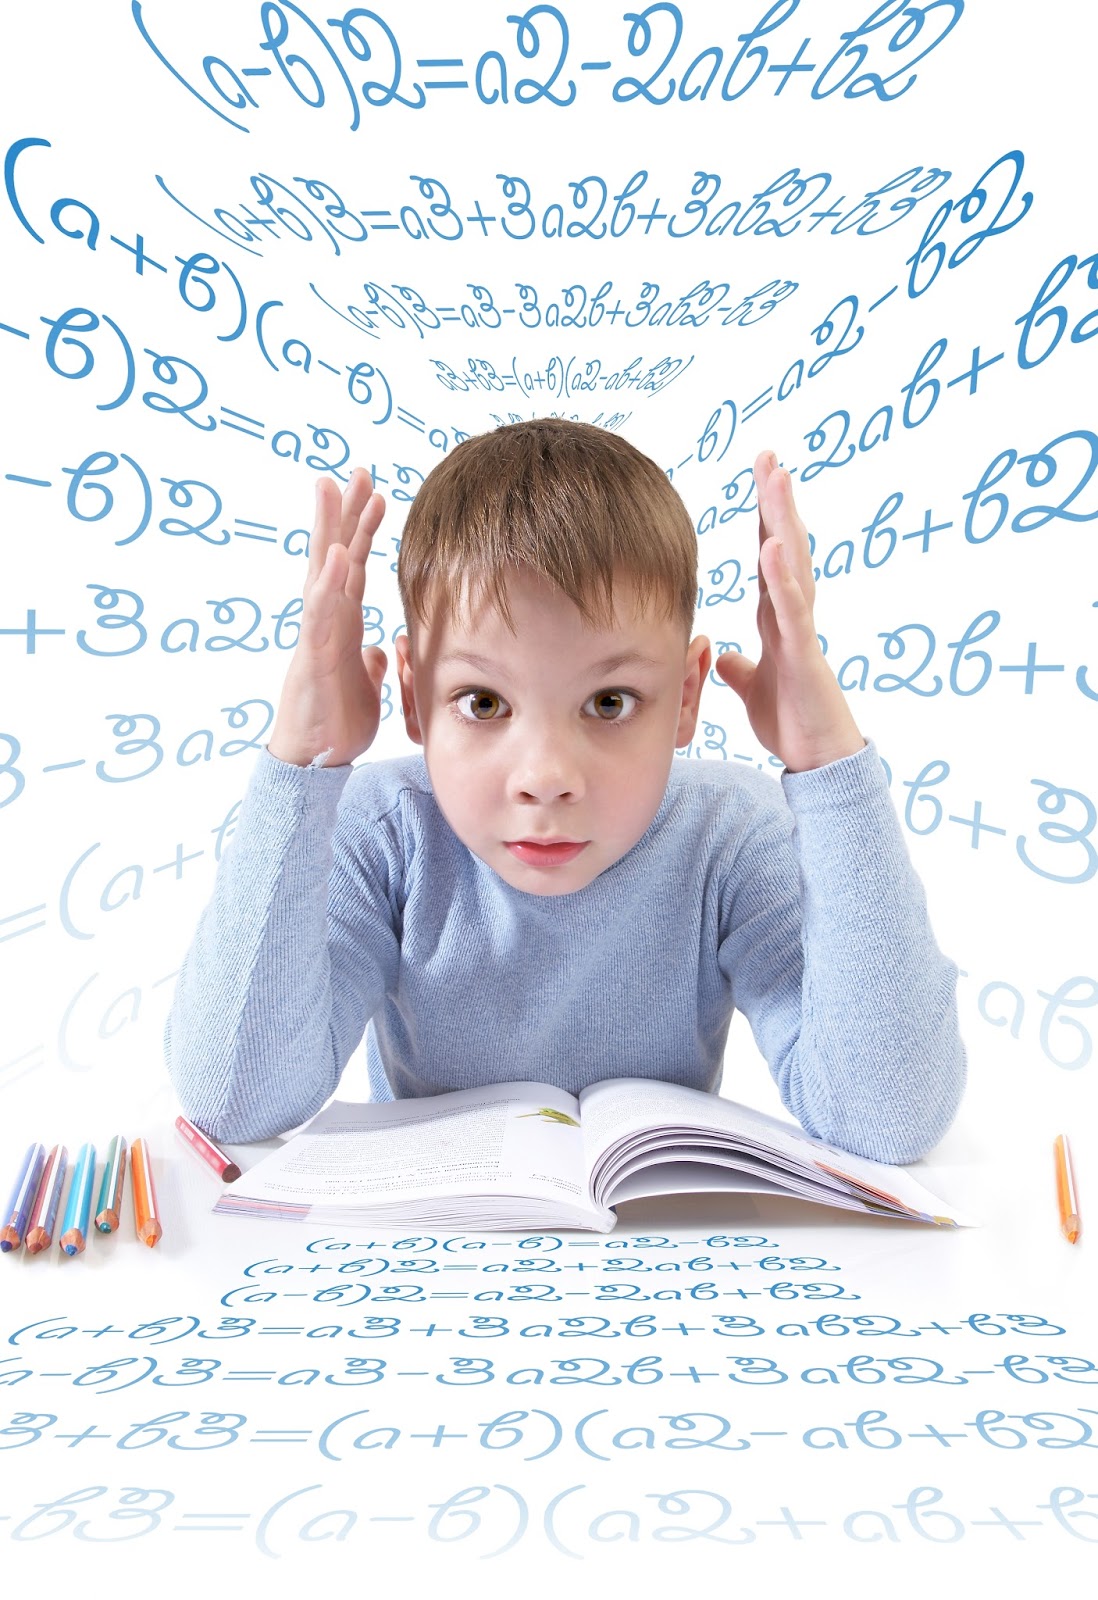 Moms Parenting Skills: Should My Child Skip A Grade? The 'Cons'